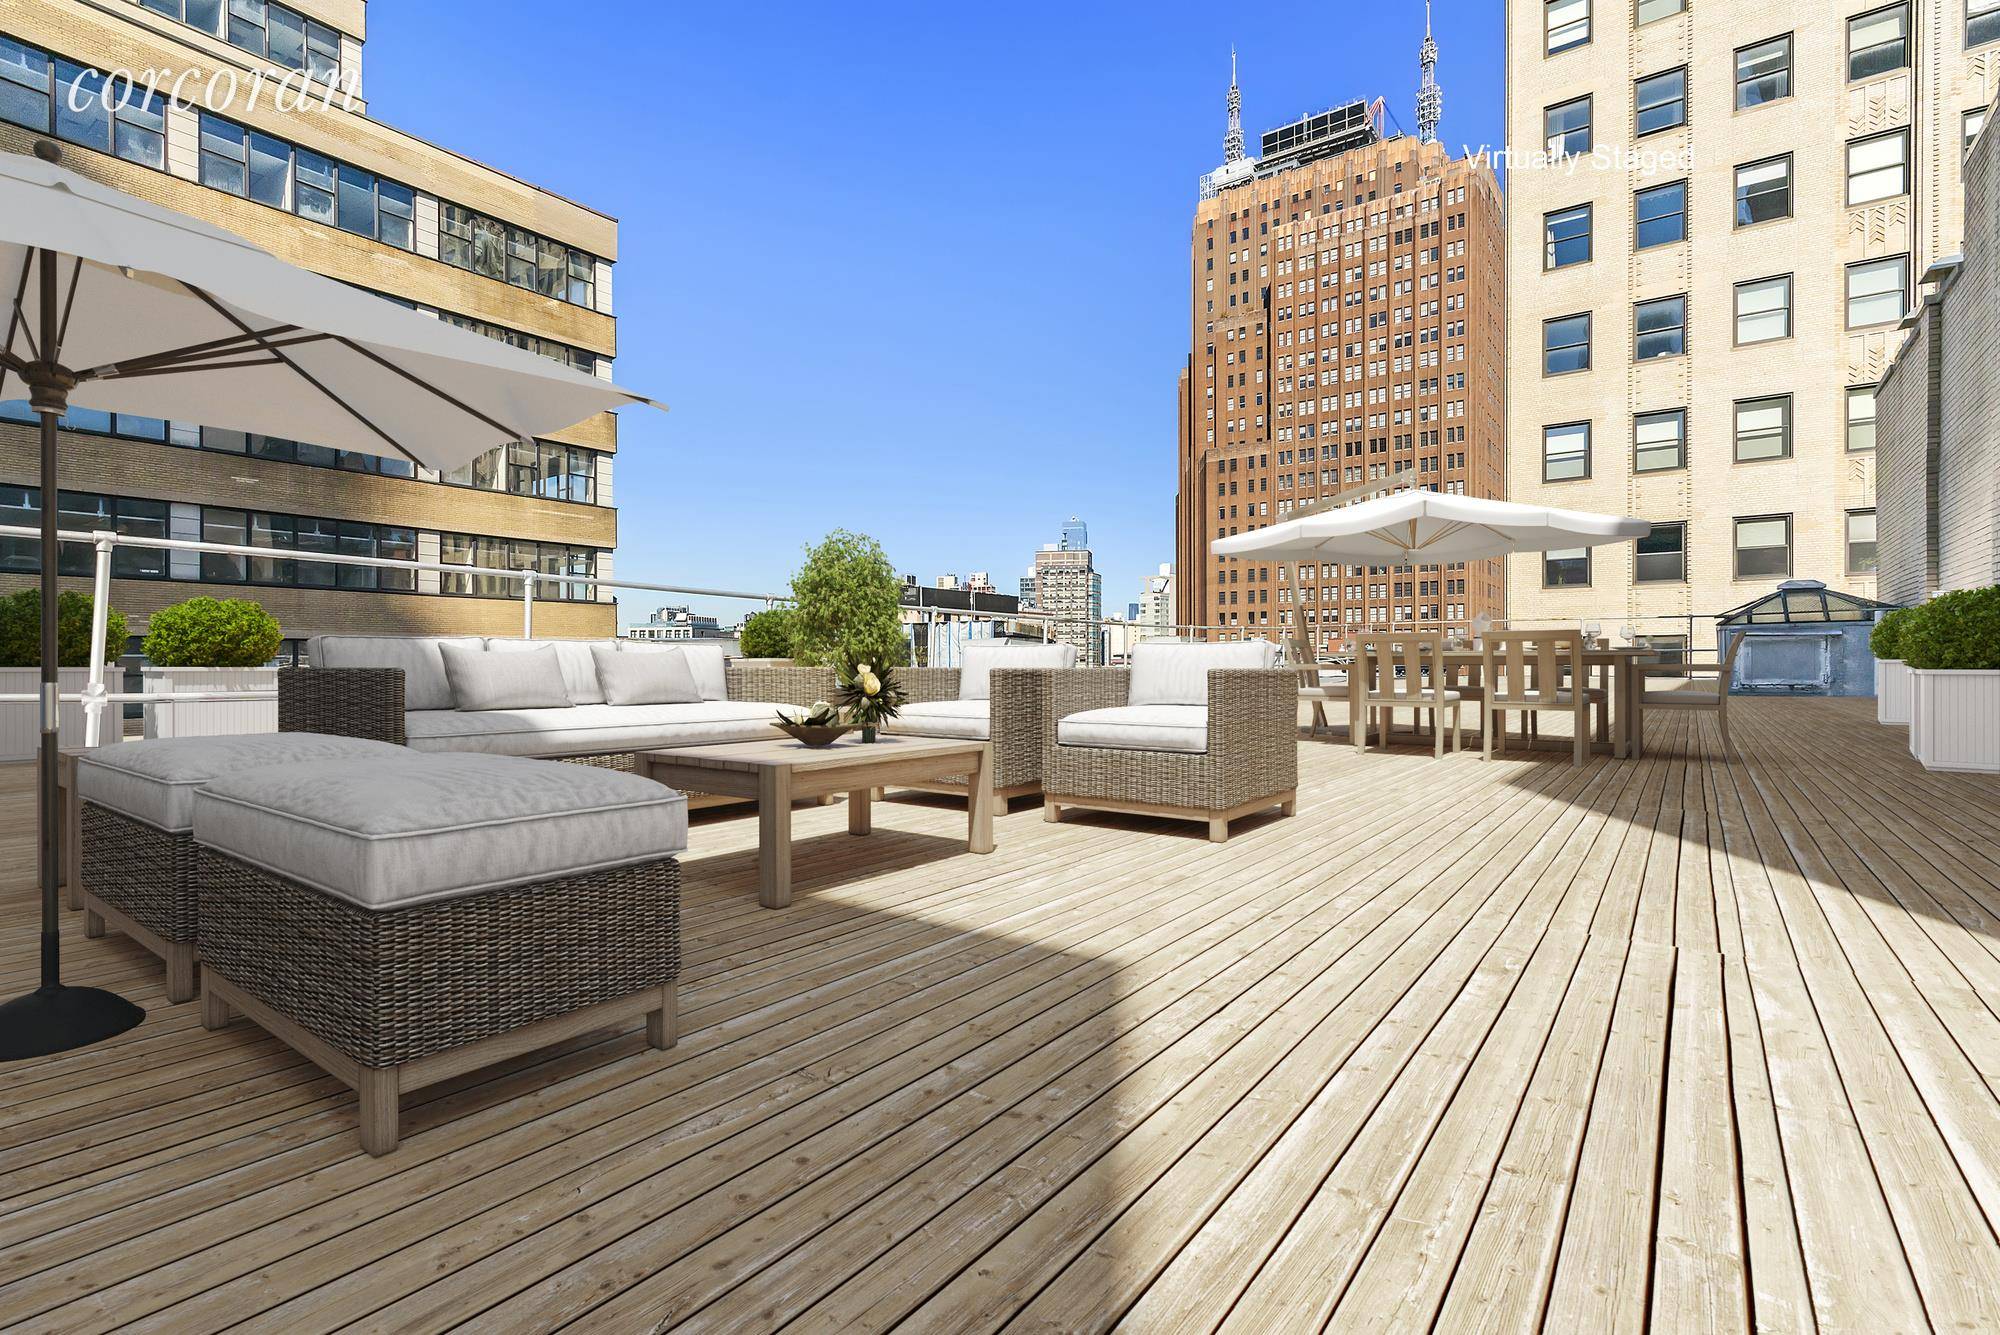 100 of entire Roof Rights offers a Rare opportunity on Franklin Street in Prime TriBeCa.